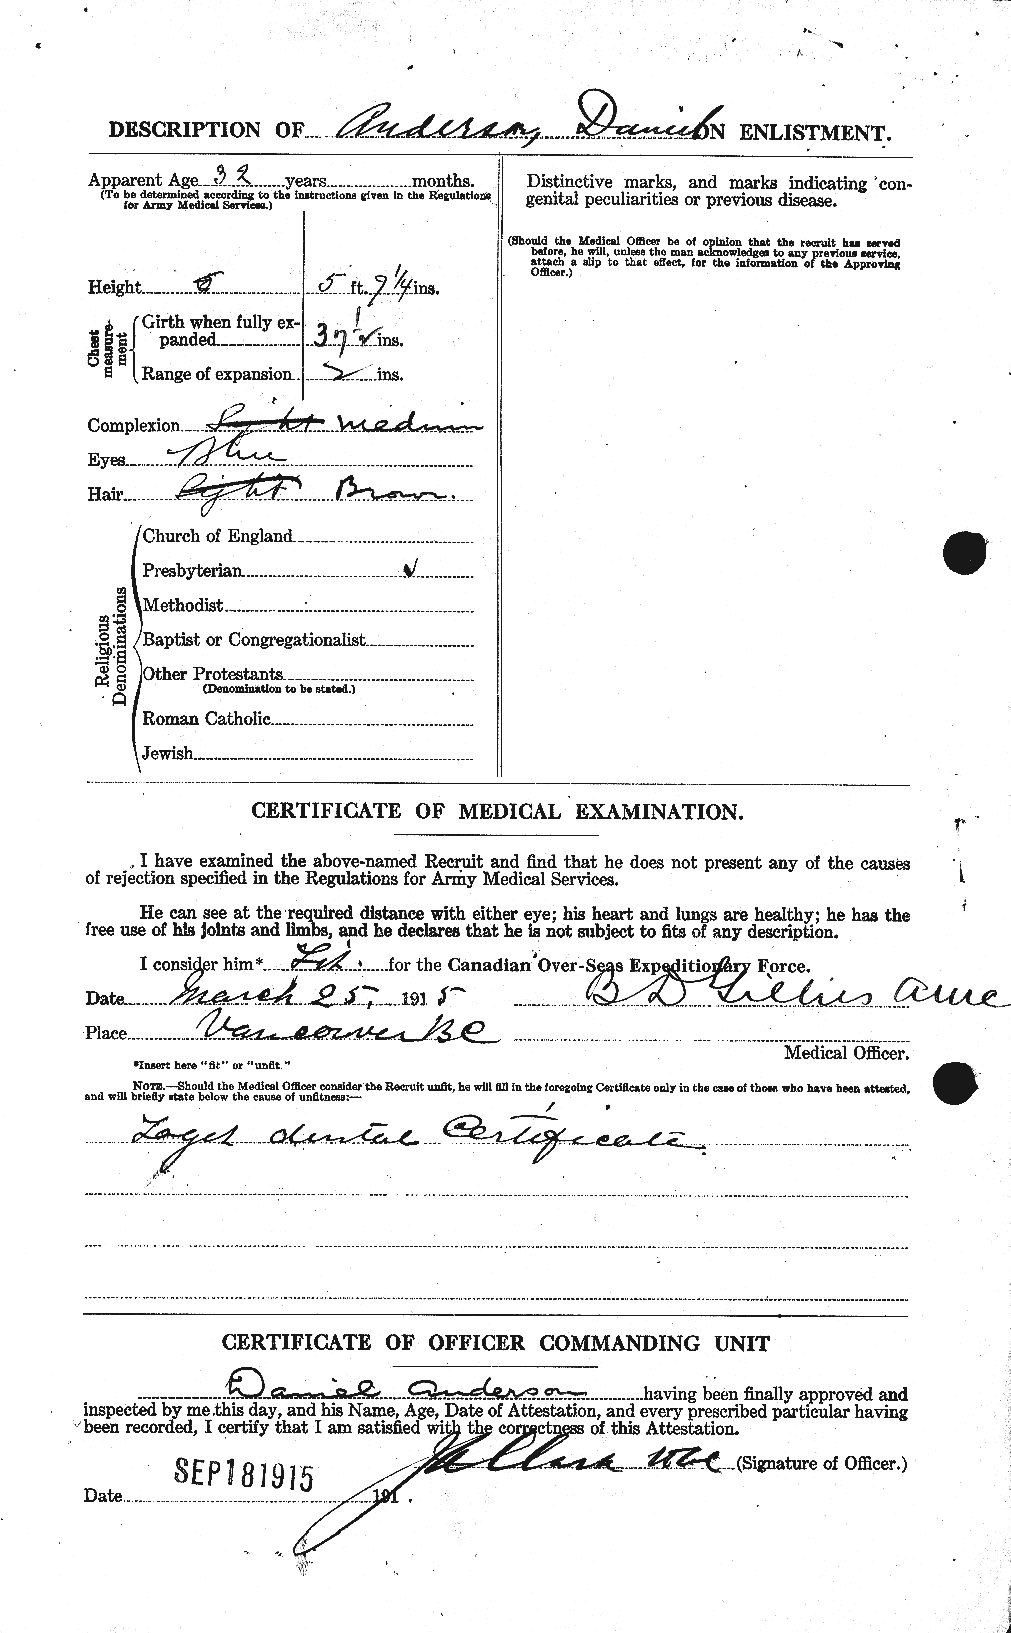 Personnel Records of the First World War - CEF 210043b